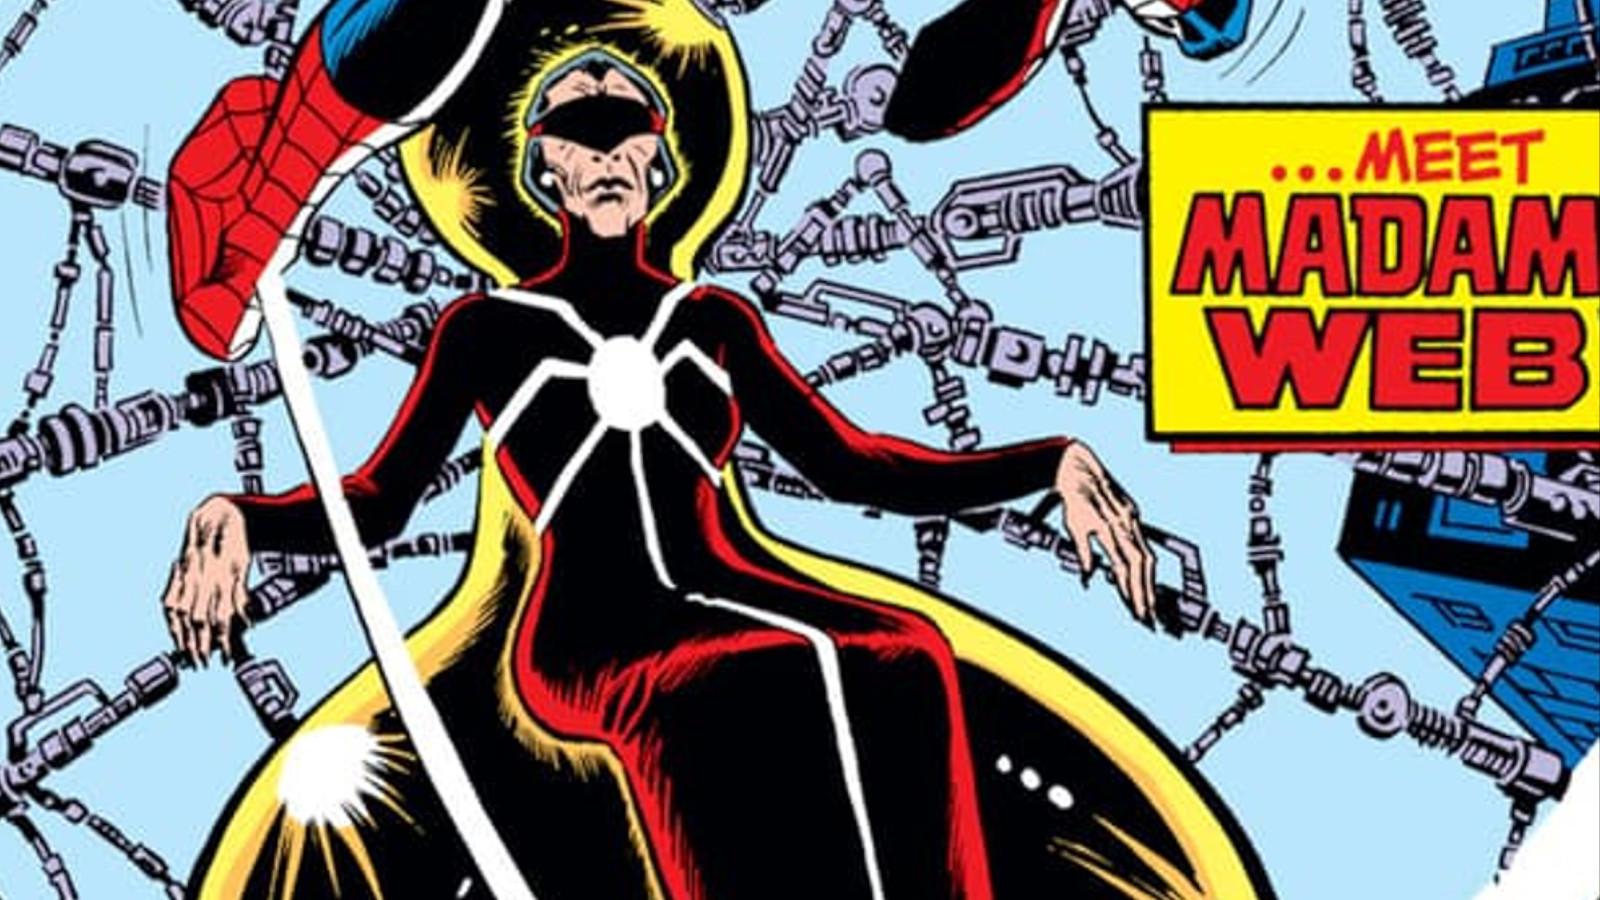 Madam Web's first appearance in Amazing Spider-Man #210